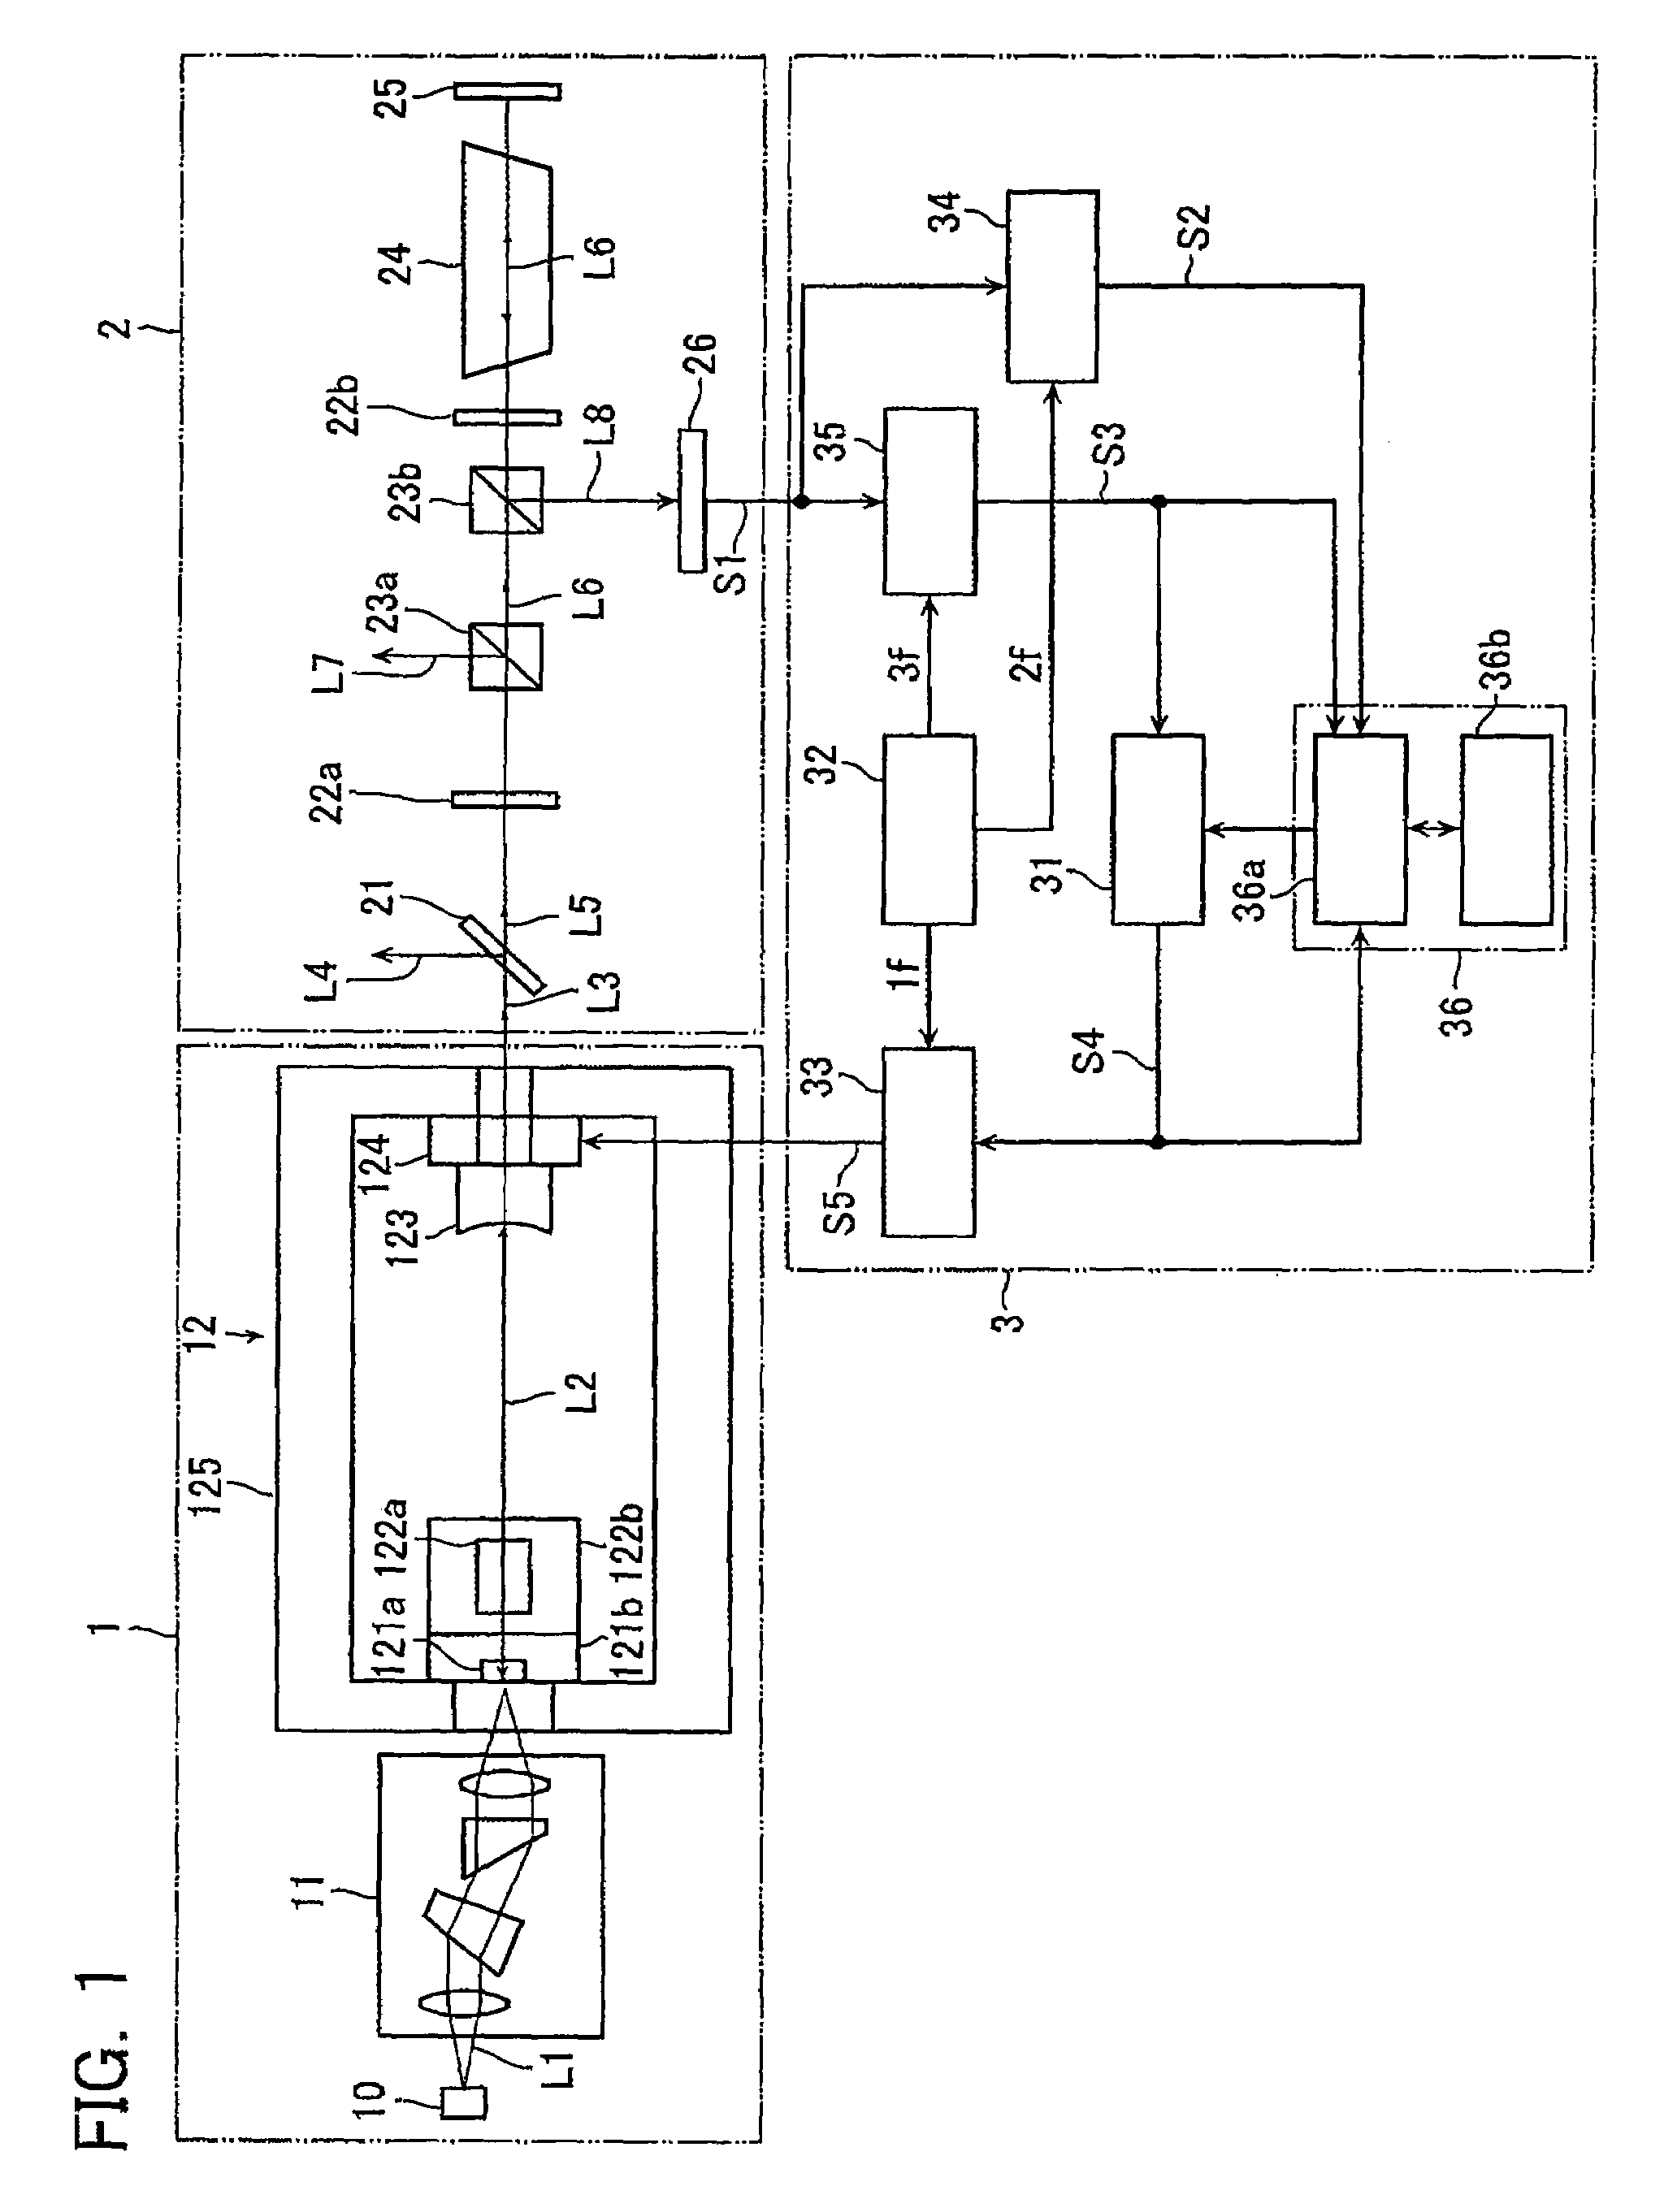 Laser frequency stabilizing apparatus, method and computer program product for stabilizing laser frequency